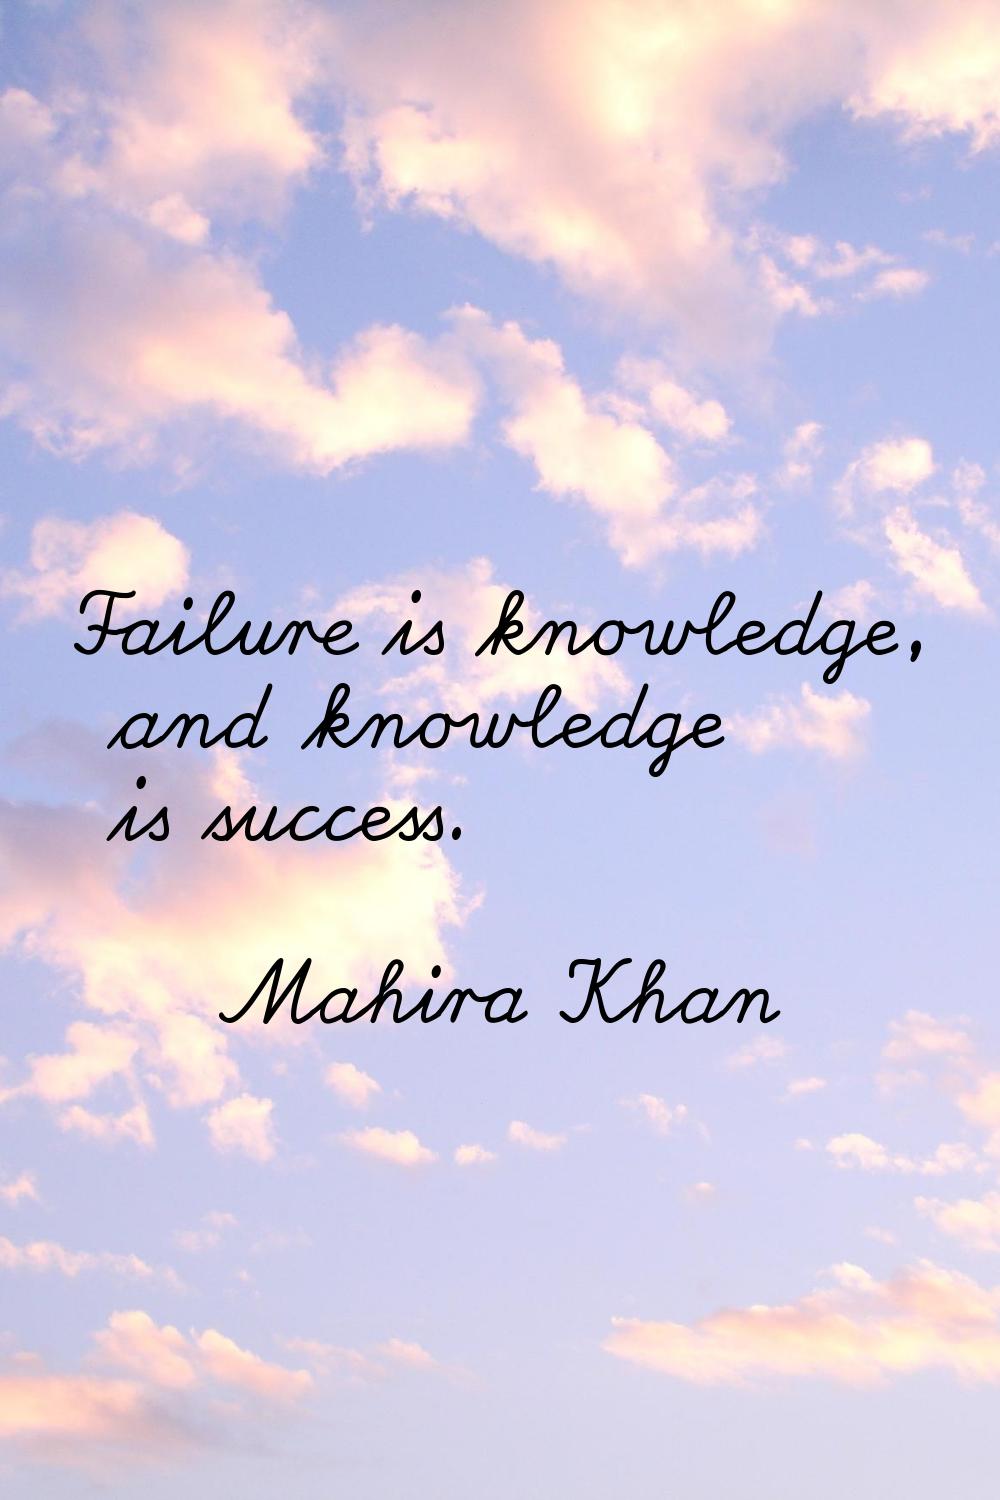 Failure is knowledge, and knowledge is success.